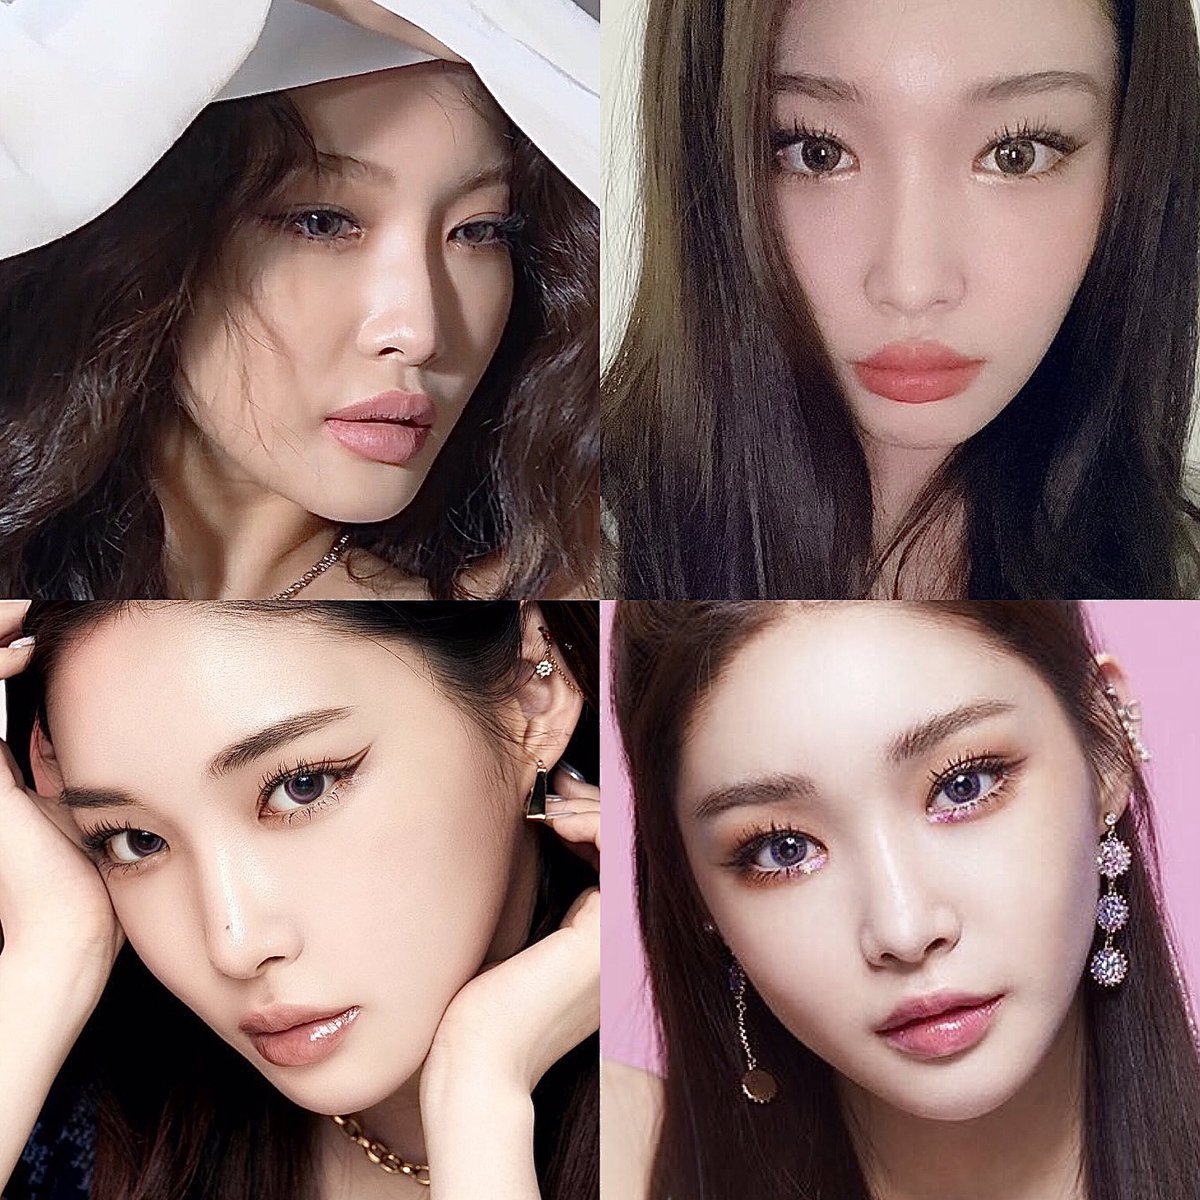 Diesen Thread anzeigen. chungha is a living doll and here’s the proof. 